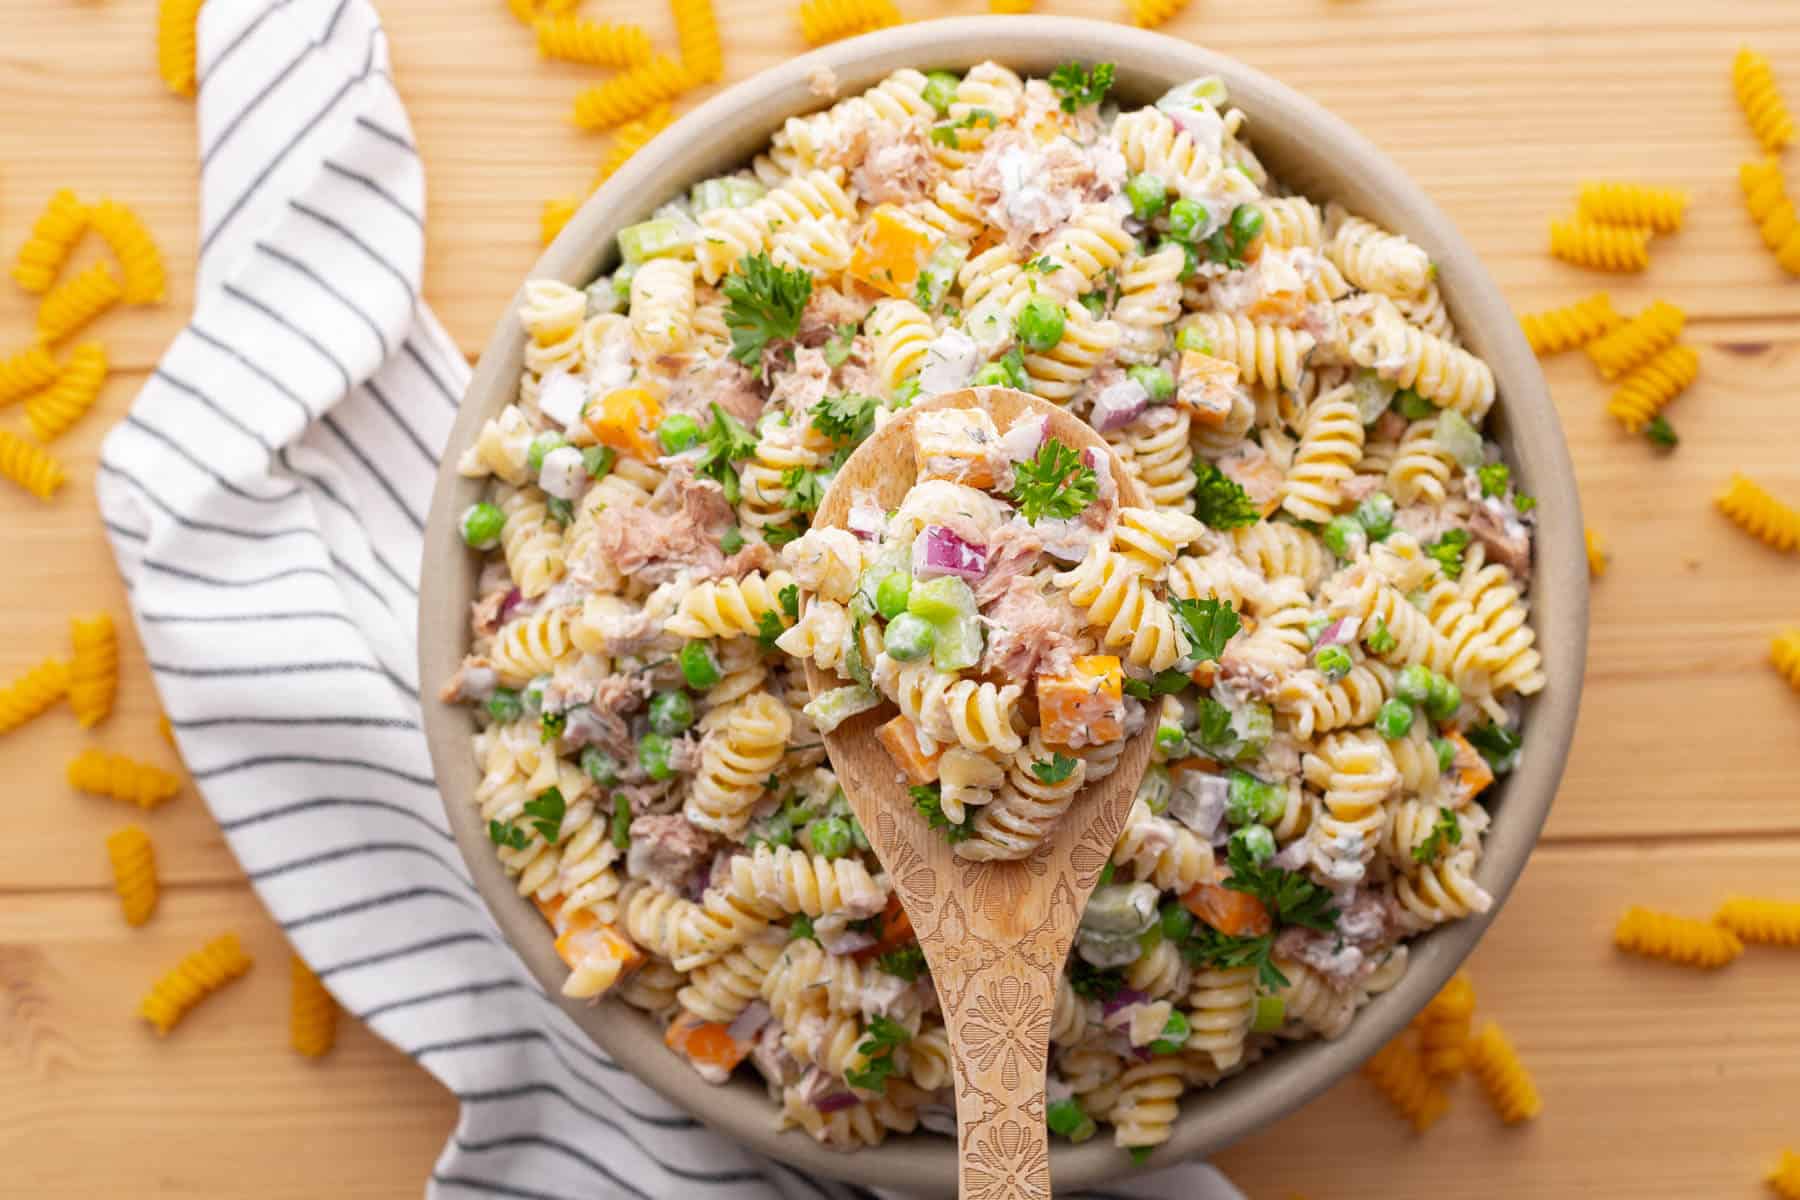 A wooden spoon holds tuna pasta salad above a bowl filled with the same salad.